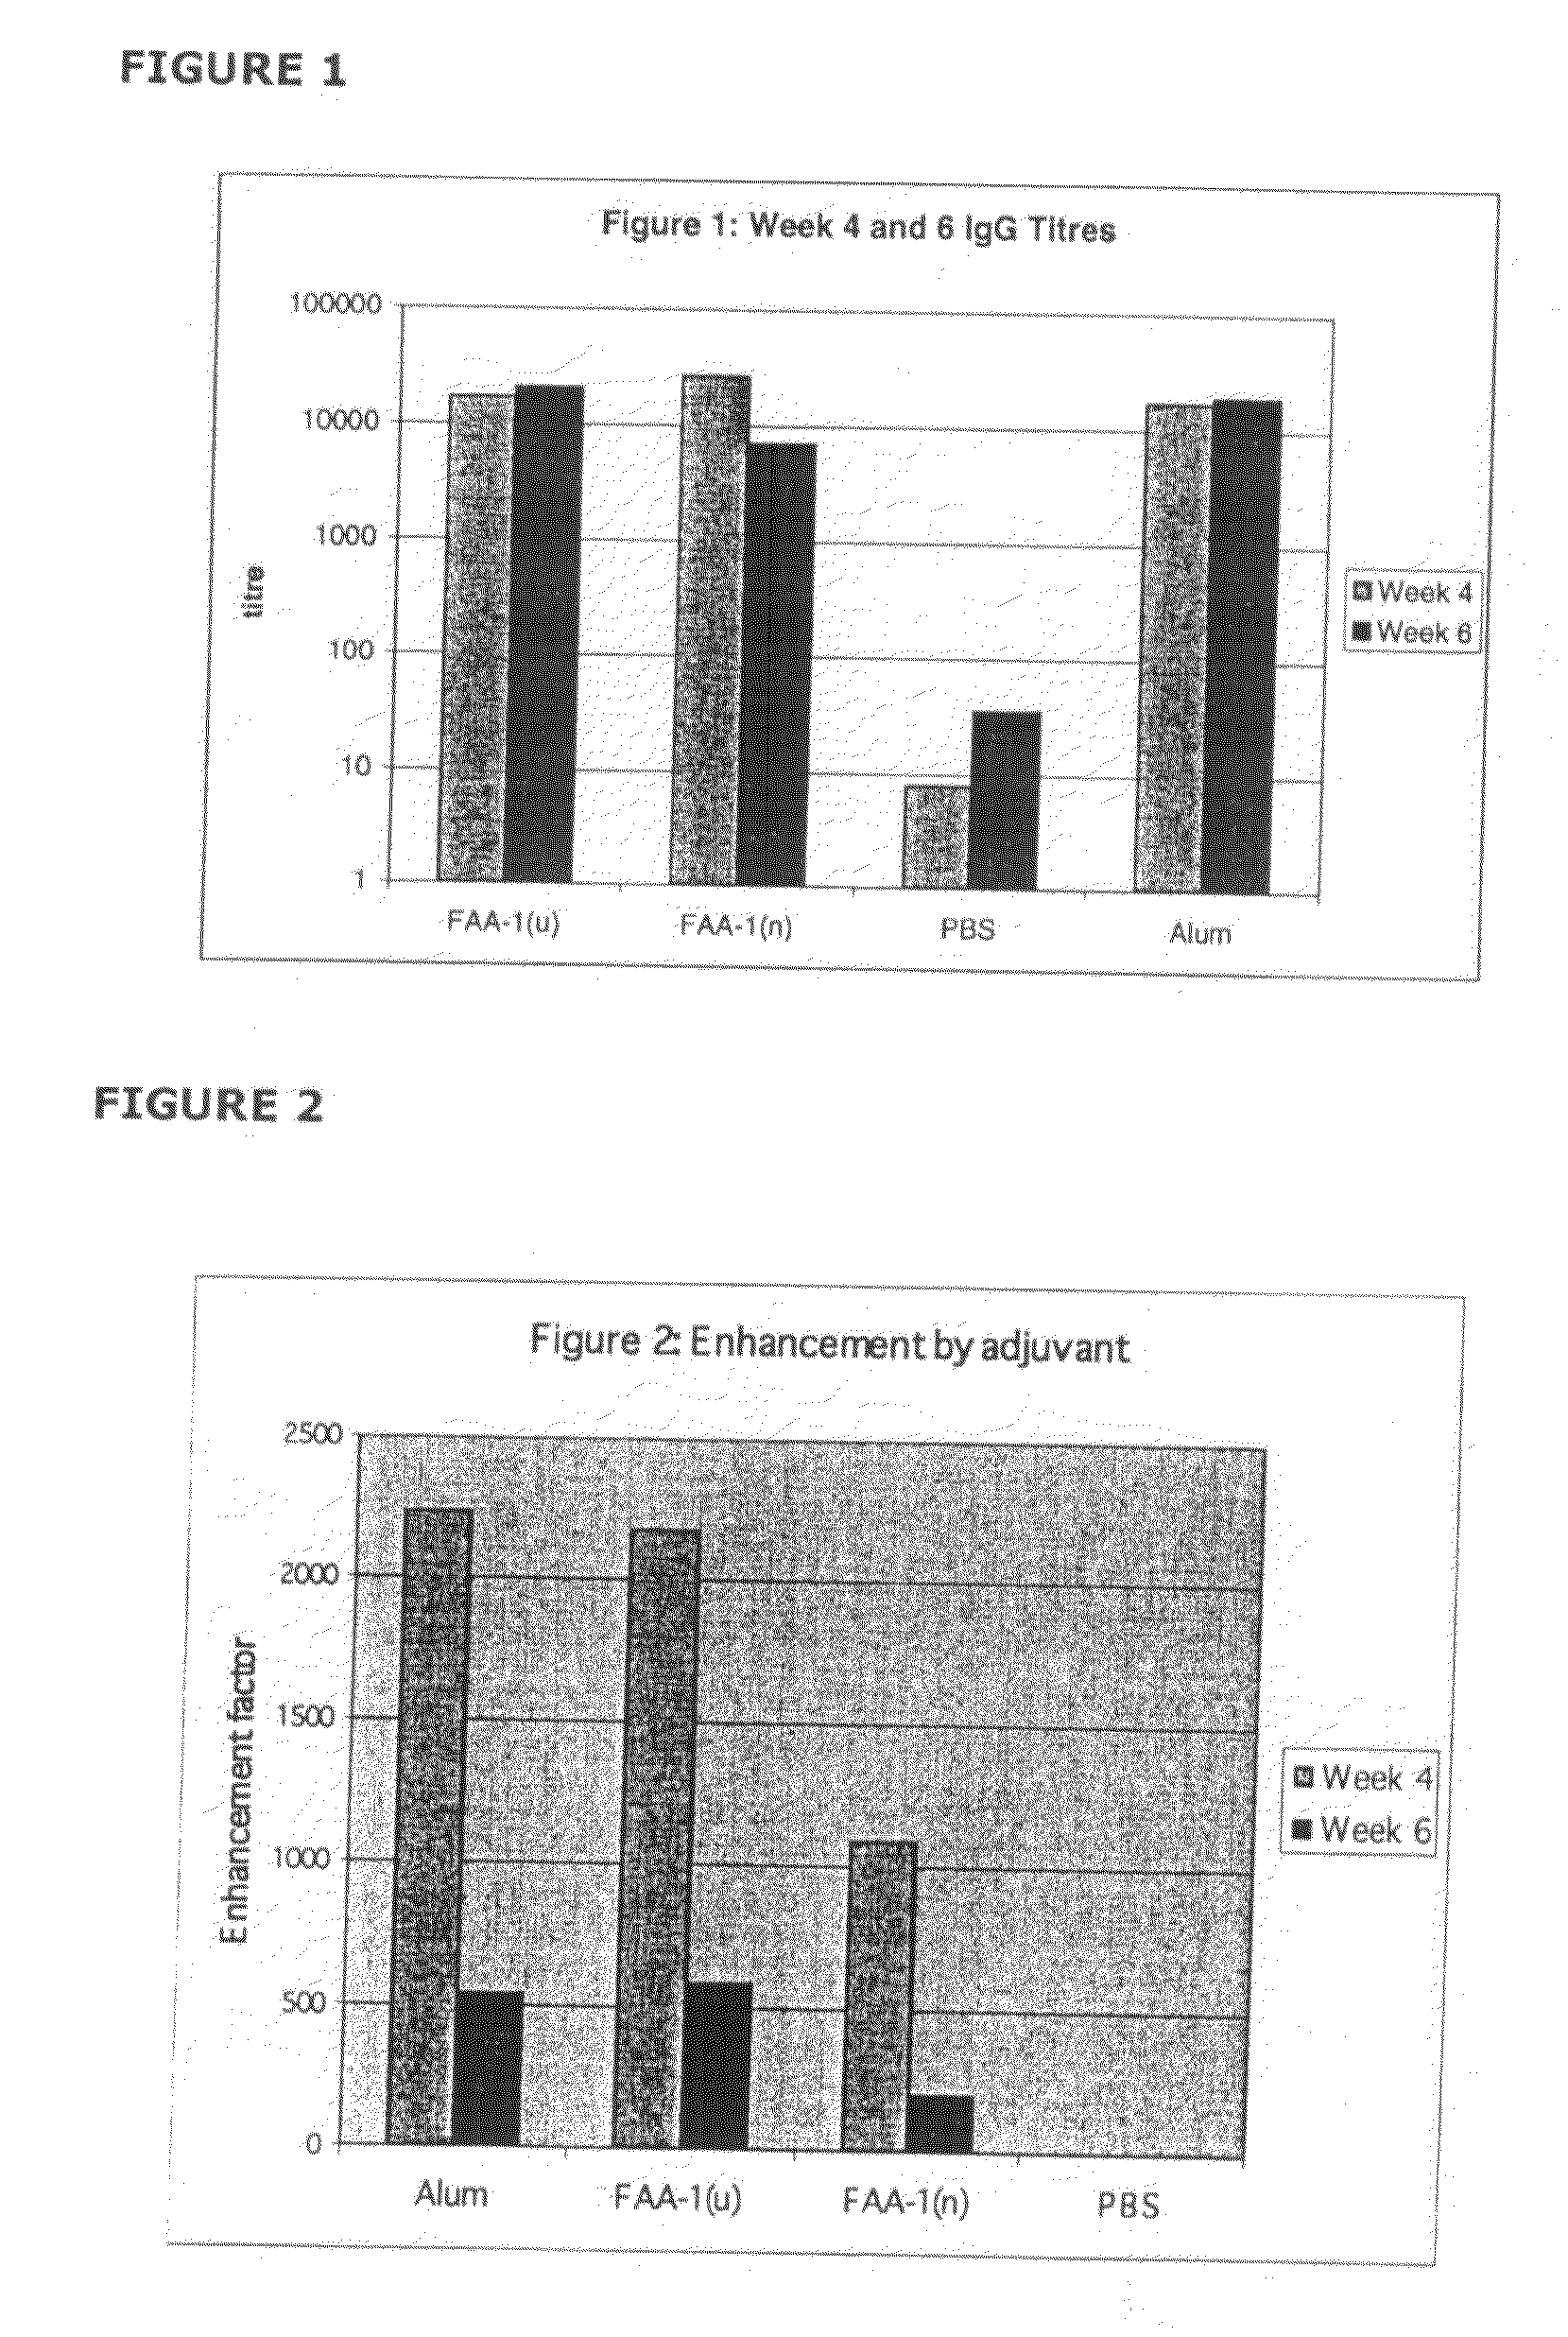 Lipid and Nitrous Oxide Combination as Adjuvant for the Enhancement of the Efficacy of Vaccines